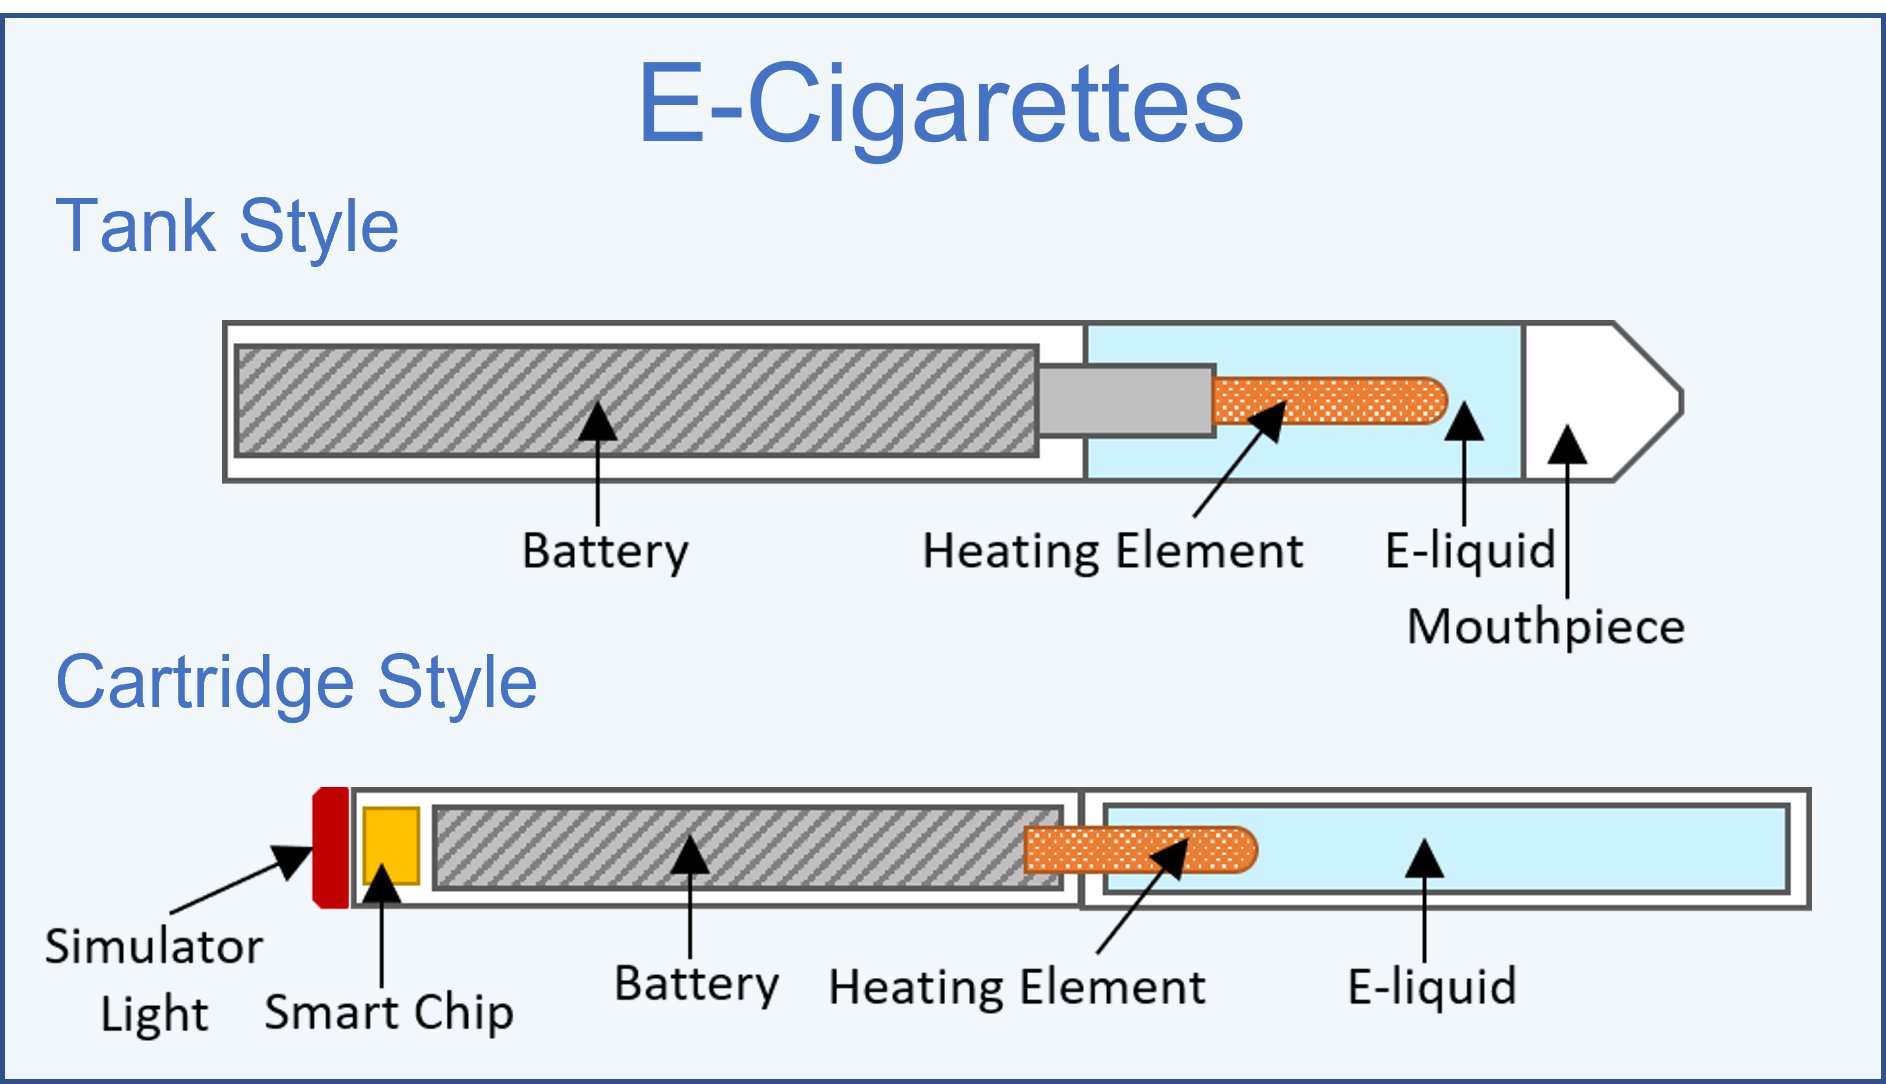 Two diagrams of e-cigarettes, tank style and cartridge style